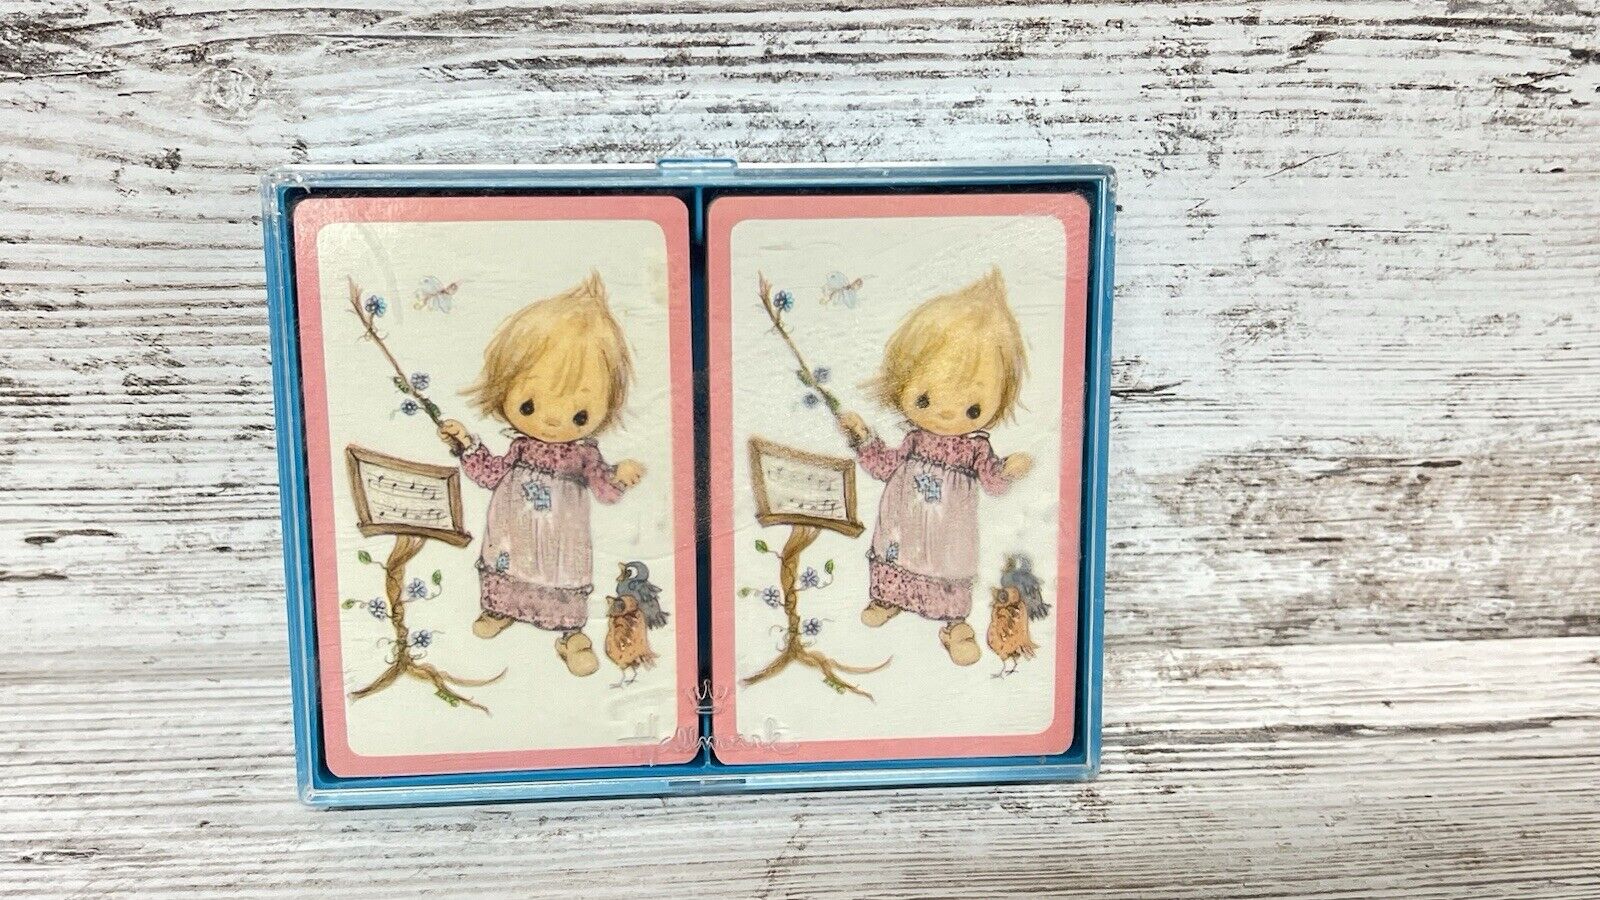 Vtg.Precious Moments by Hallmark Card-2 Decks Playing Cards in orig. case 🇺🇸